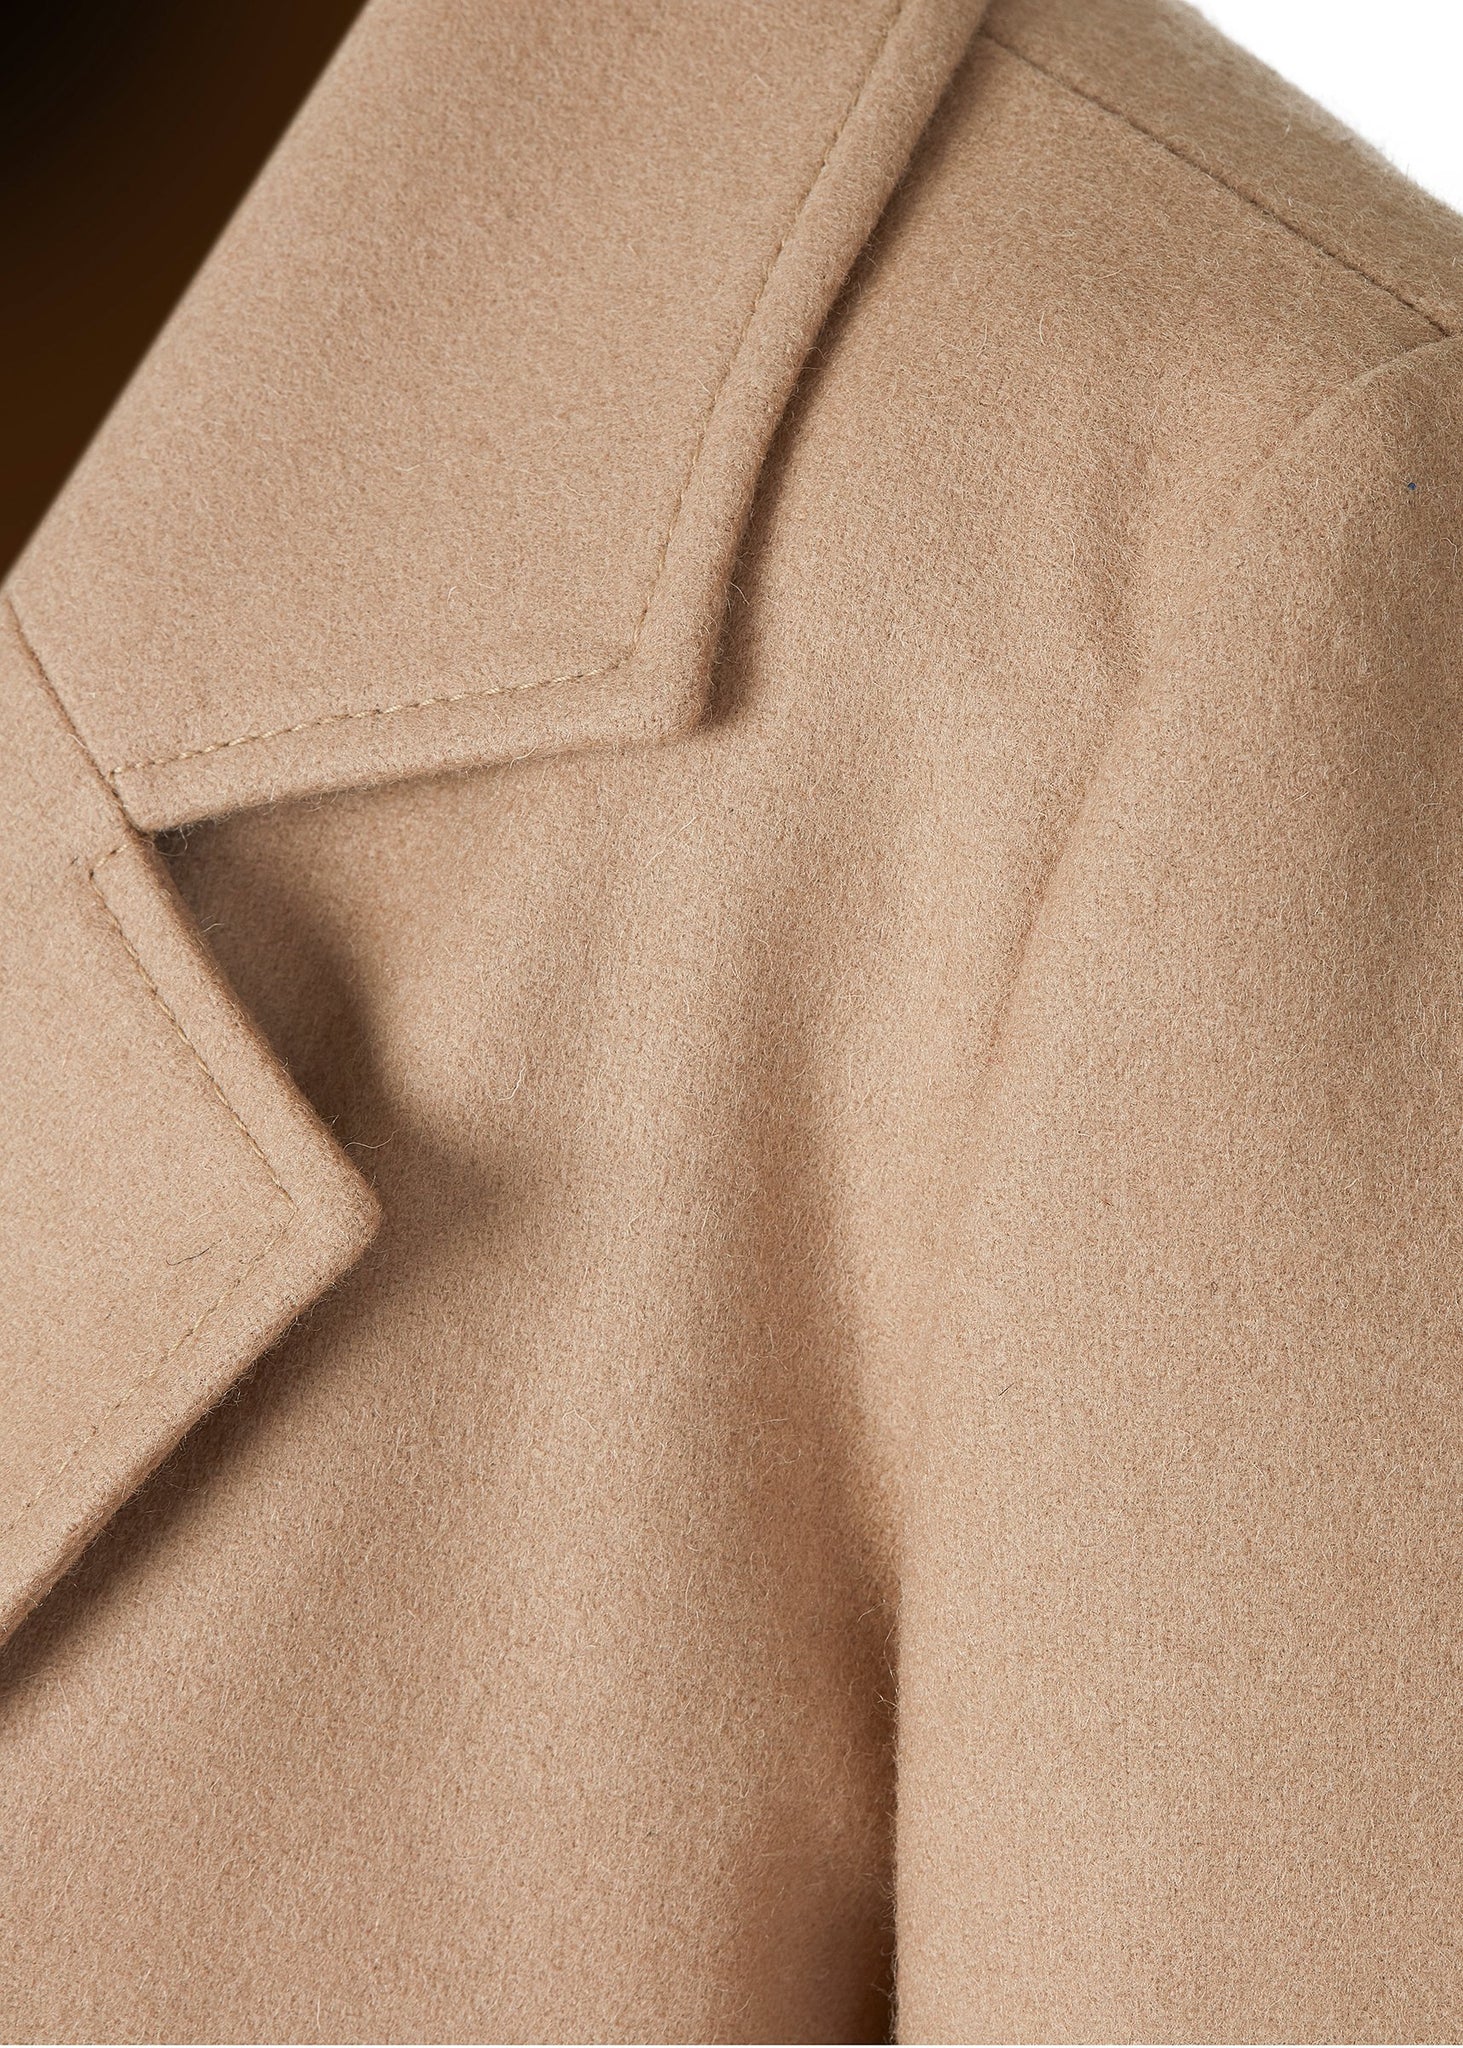 Collar detail of Womens camel wool double breasted mid-length tweed coat 